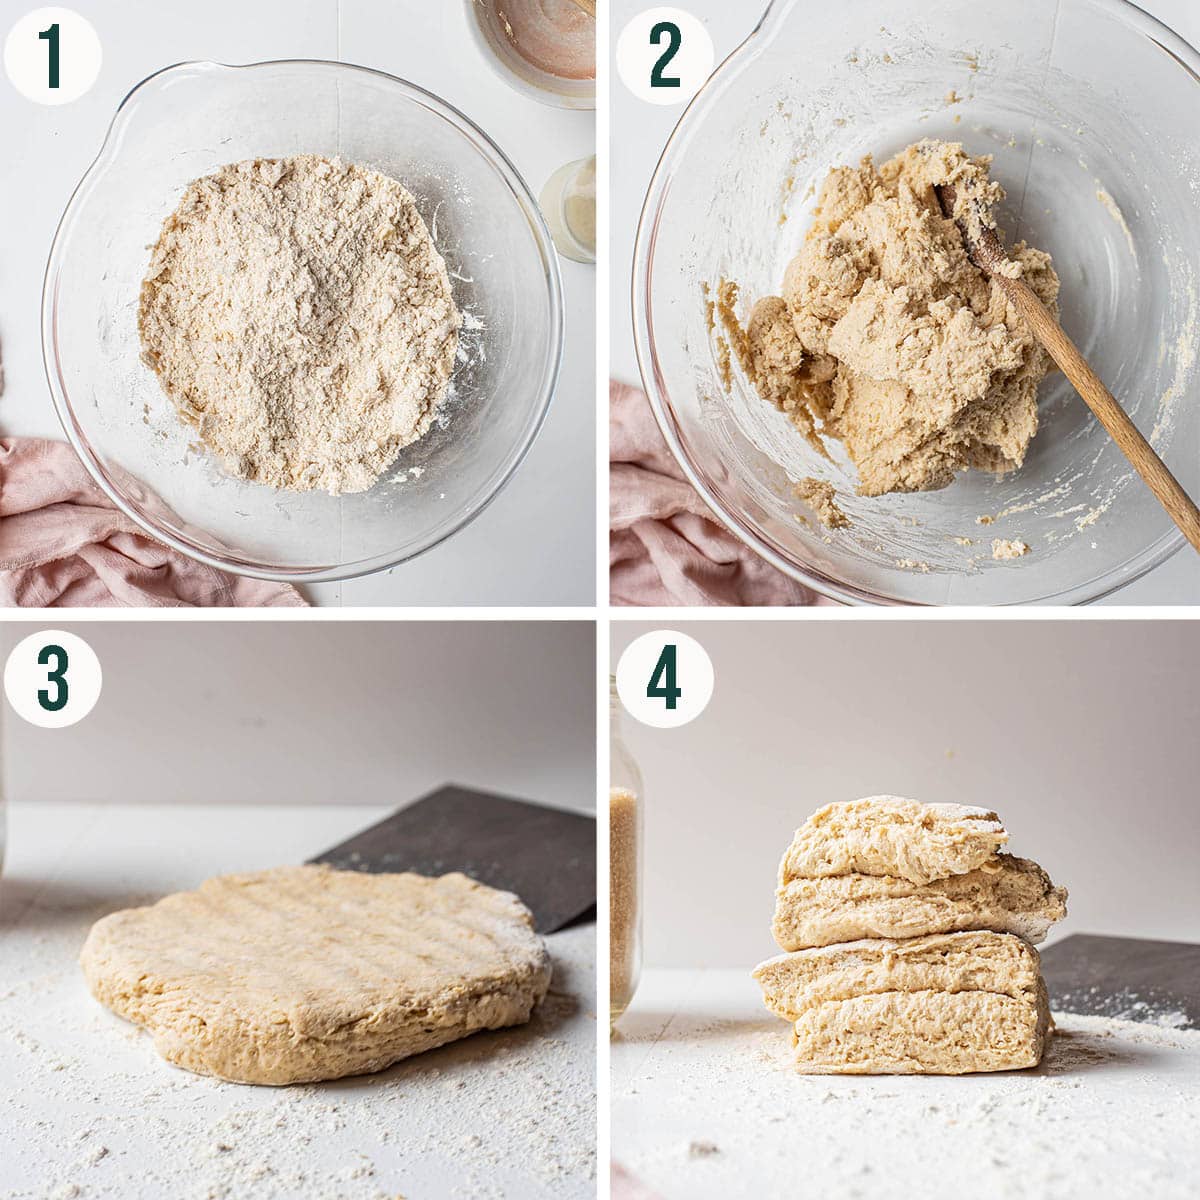 Scones steps 1 to 4, mixing the dough and rolling it out.